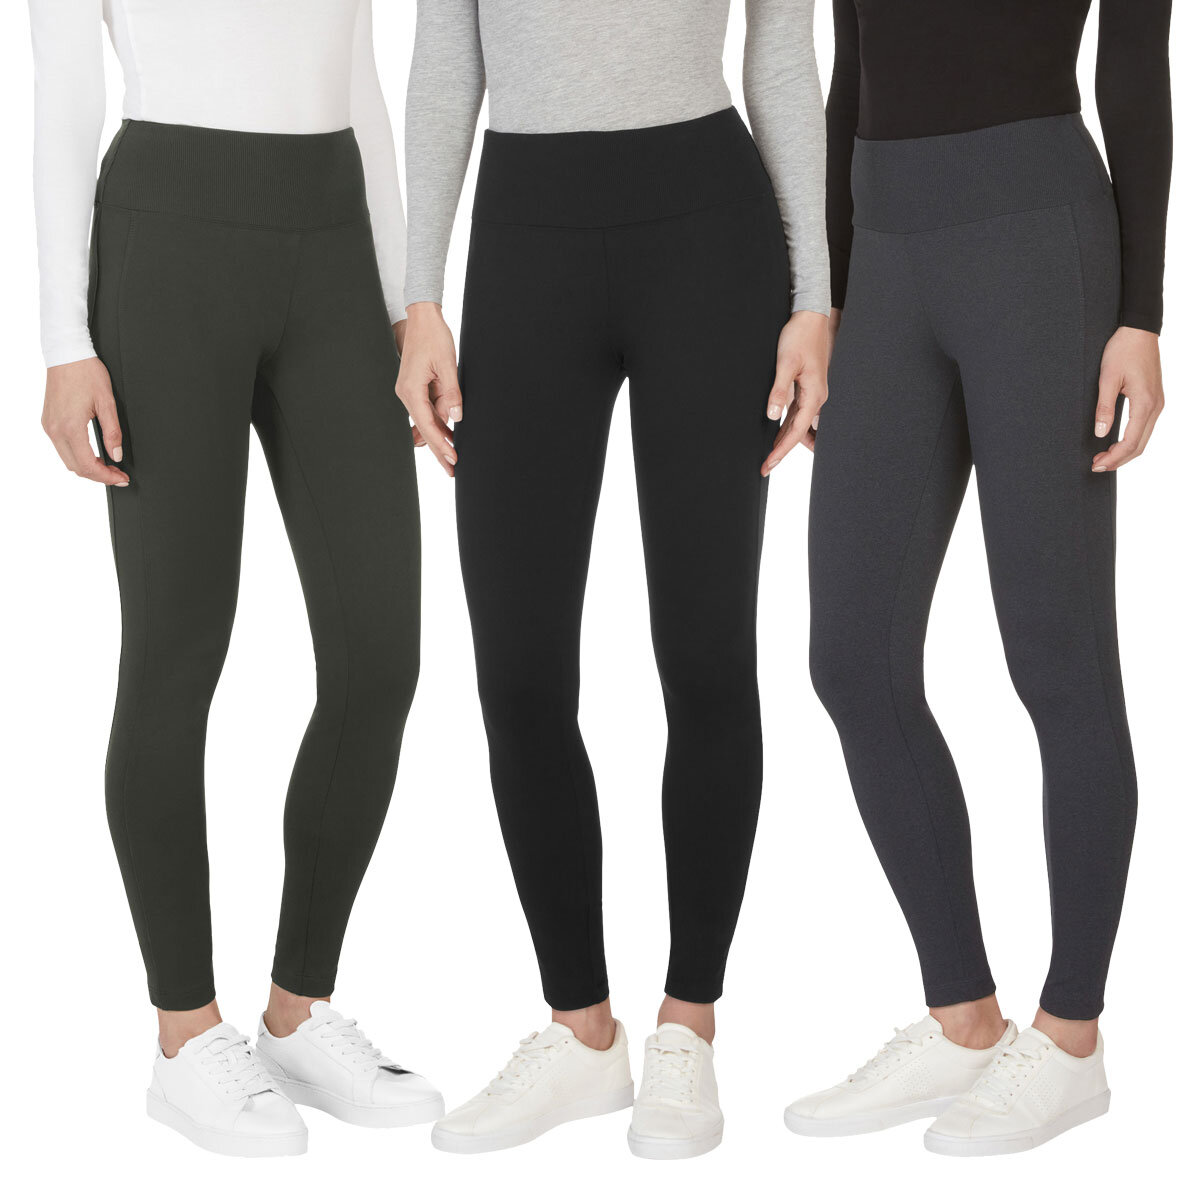 Wholesale Leggings - Wholesale activewear. Family owned, ethical